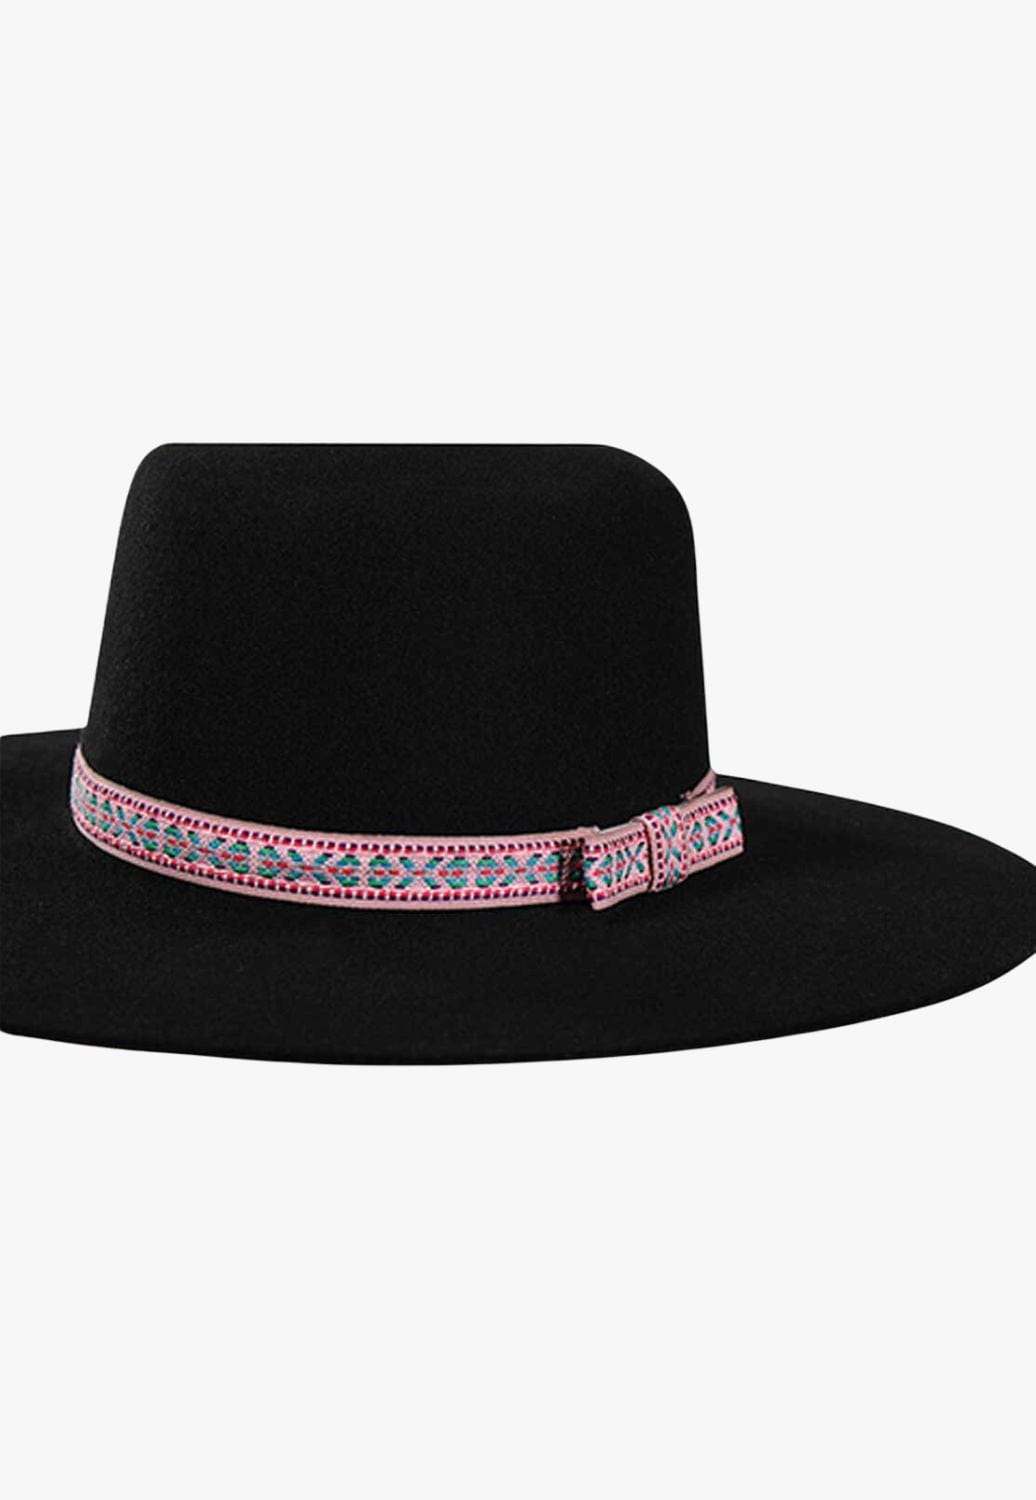 Twister ACCESSORIES-Hat Bands Pink Twister XOXO Hatband